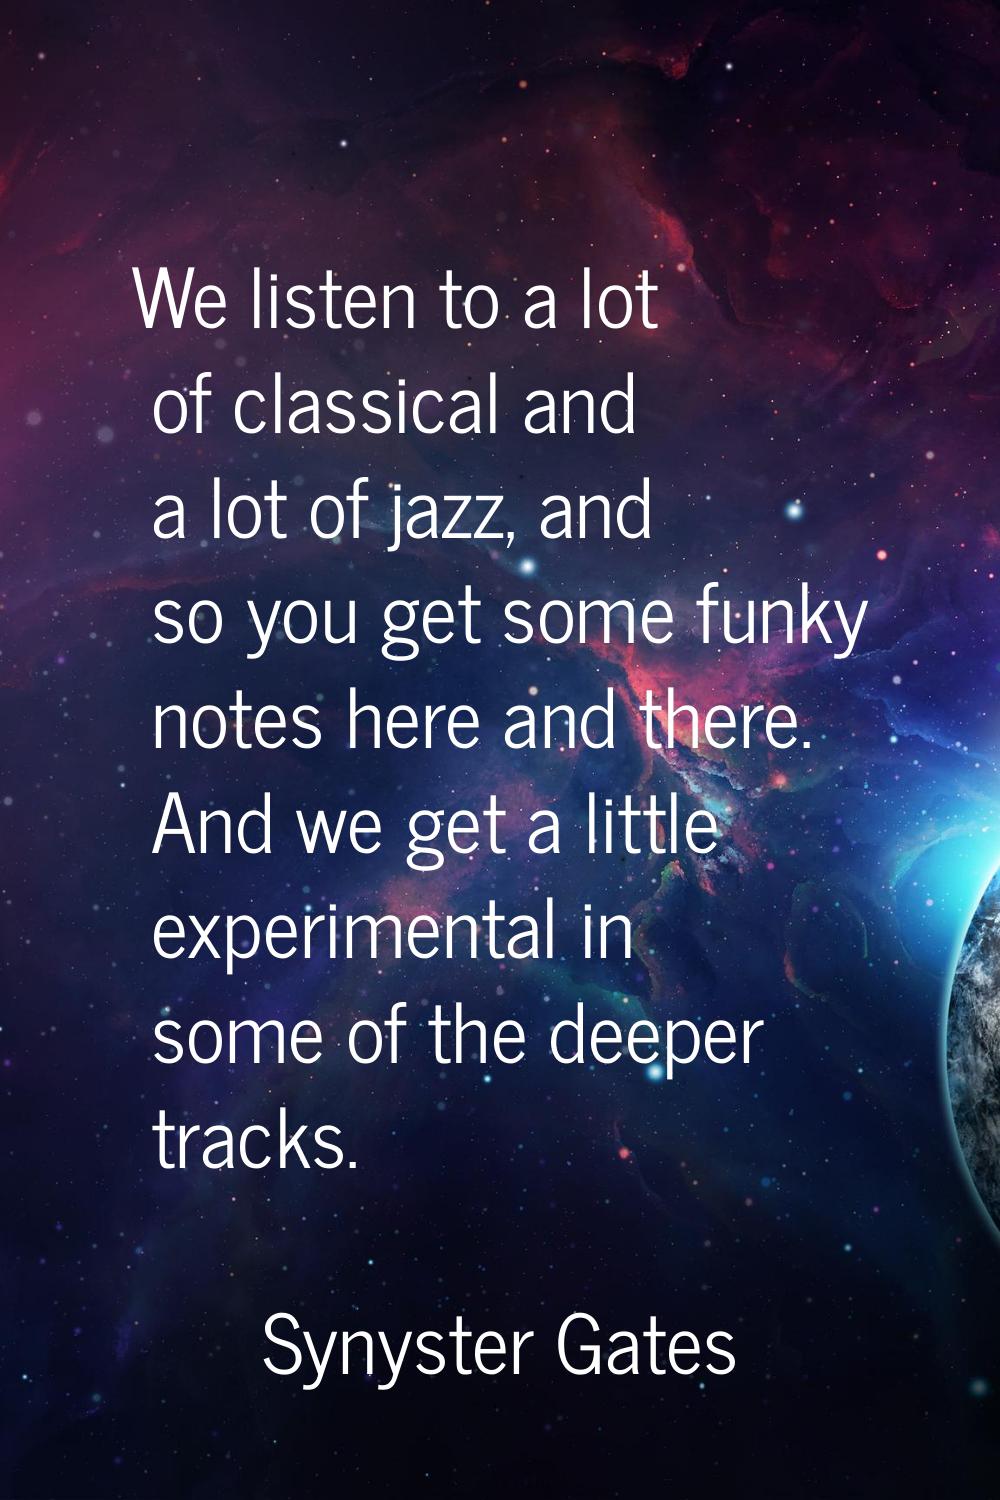 We listen to a lot of classical and a lot of jazz, and so you get some funky notes here and there. 